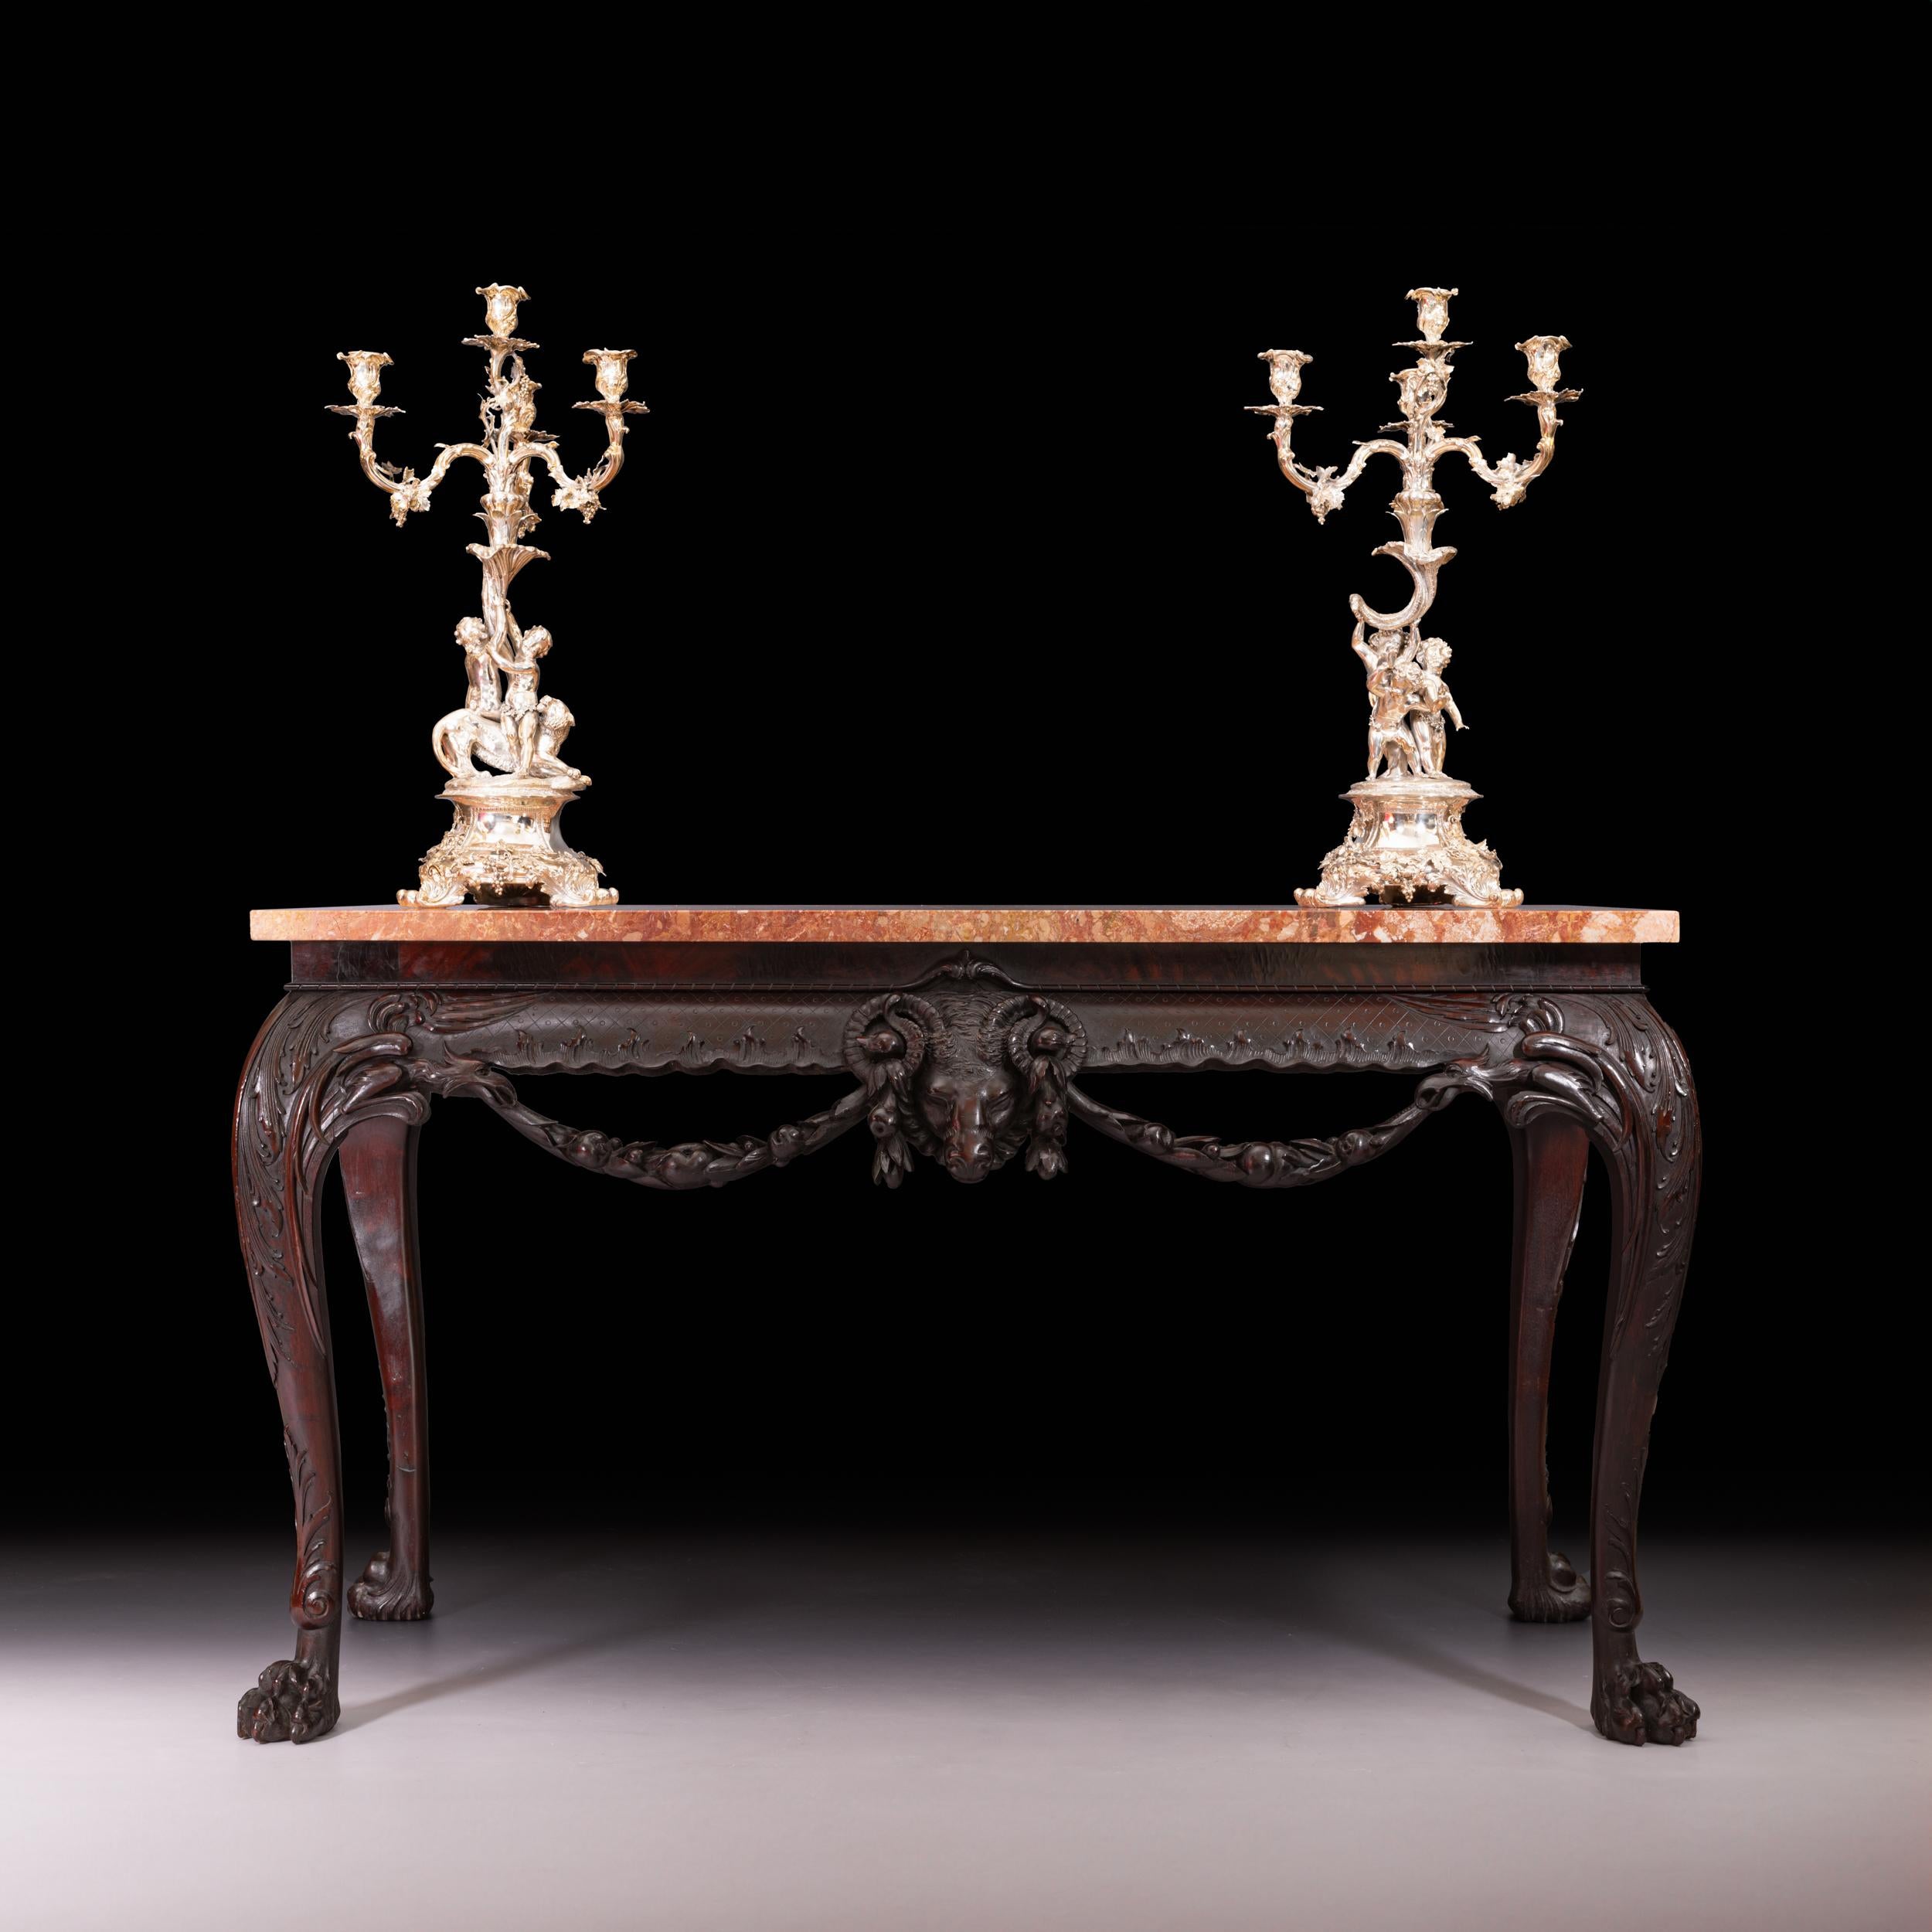 19th Century Irish Marble Top Console Table In the George III Style For Sale 6